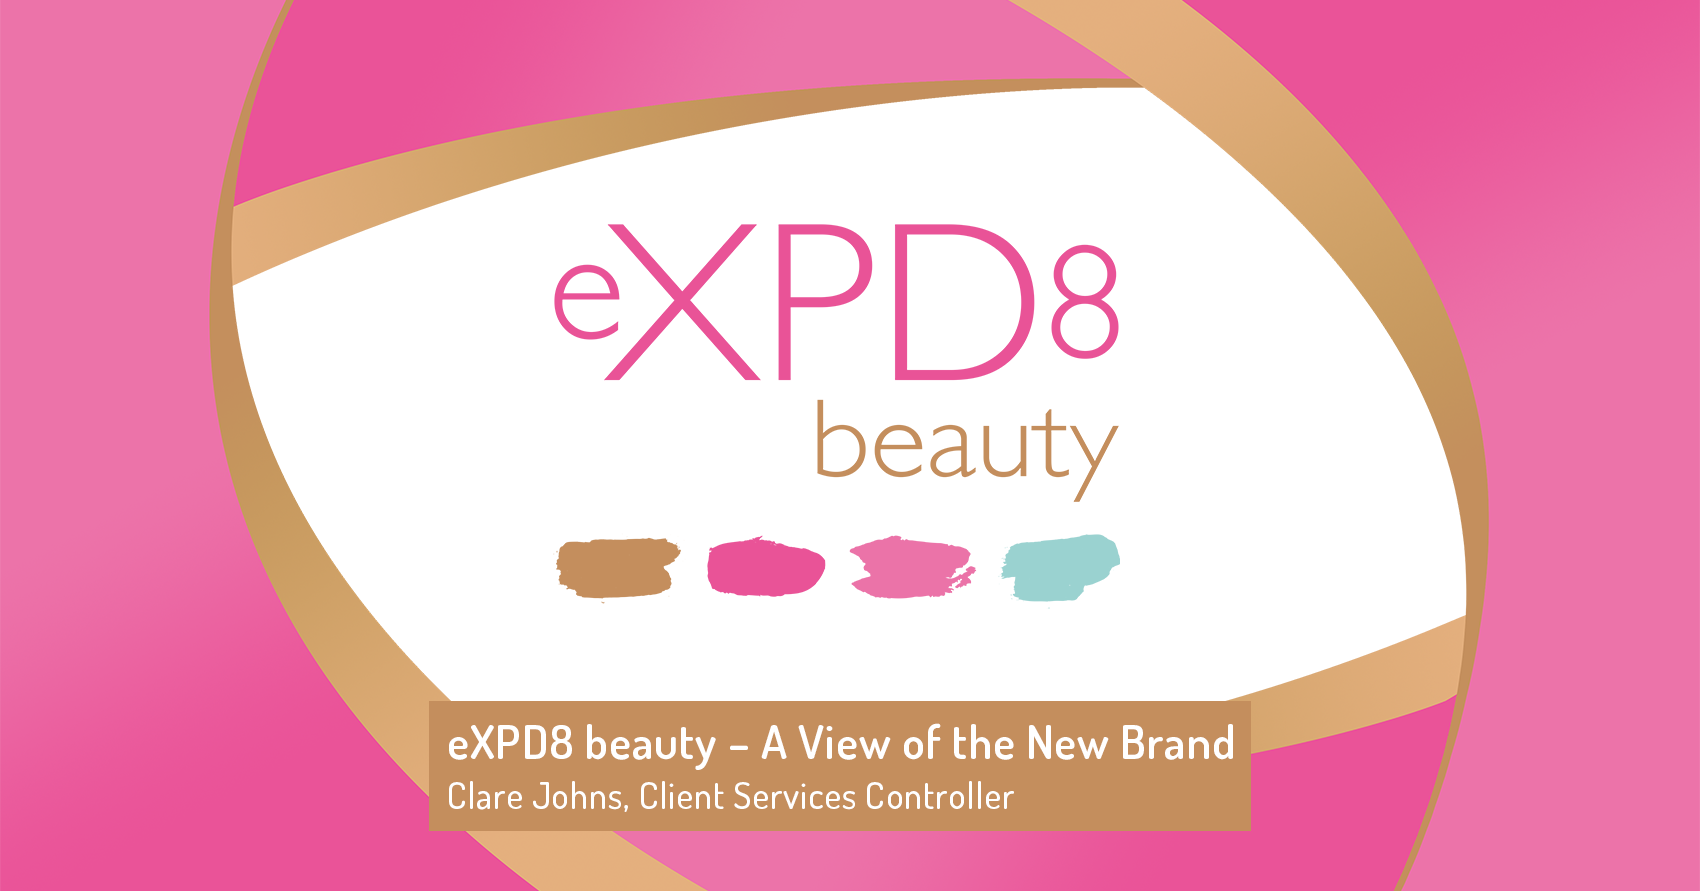 eXPD8 beauty feature image